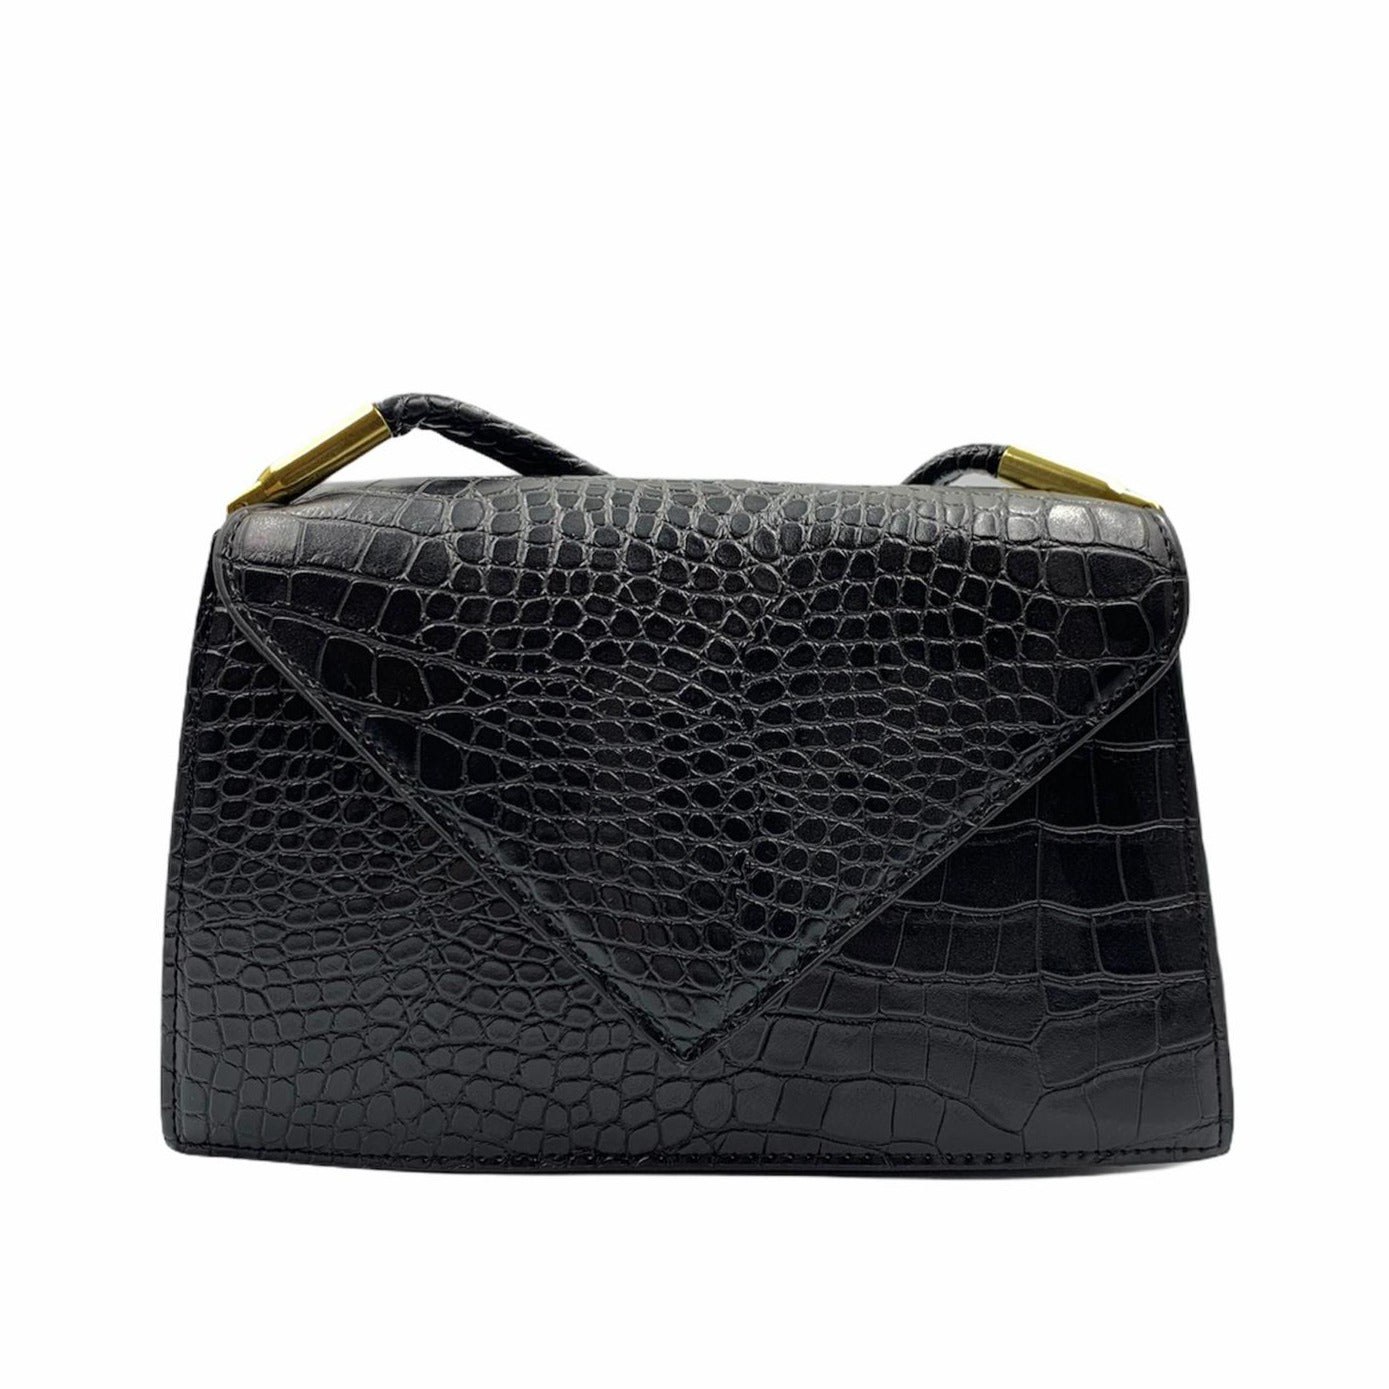 Black Crocodile Leather Bag with Gold detail